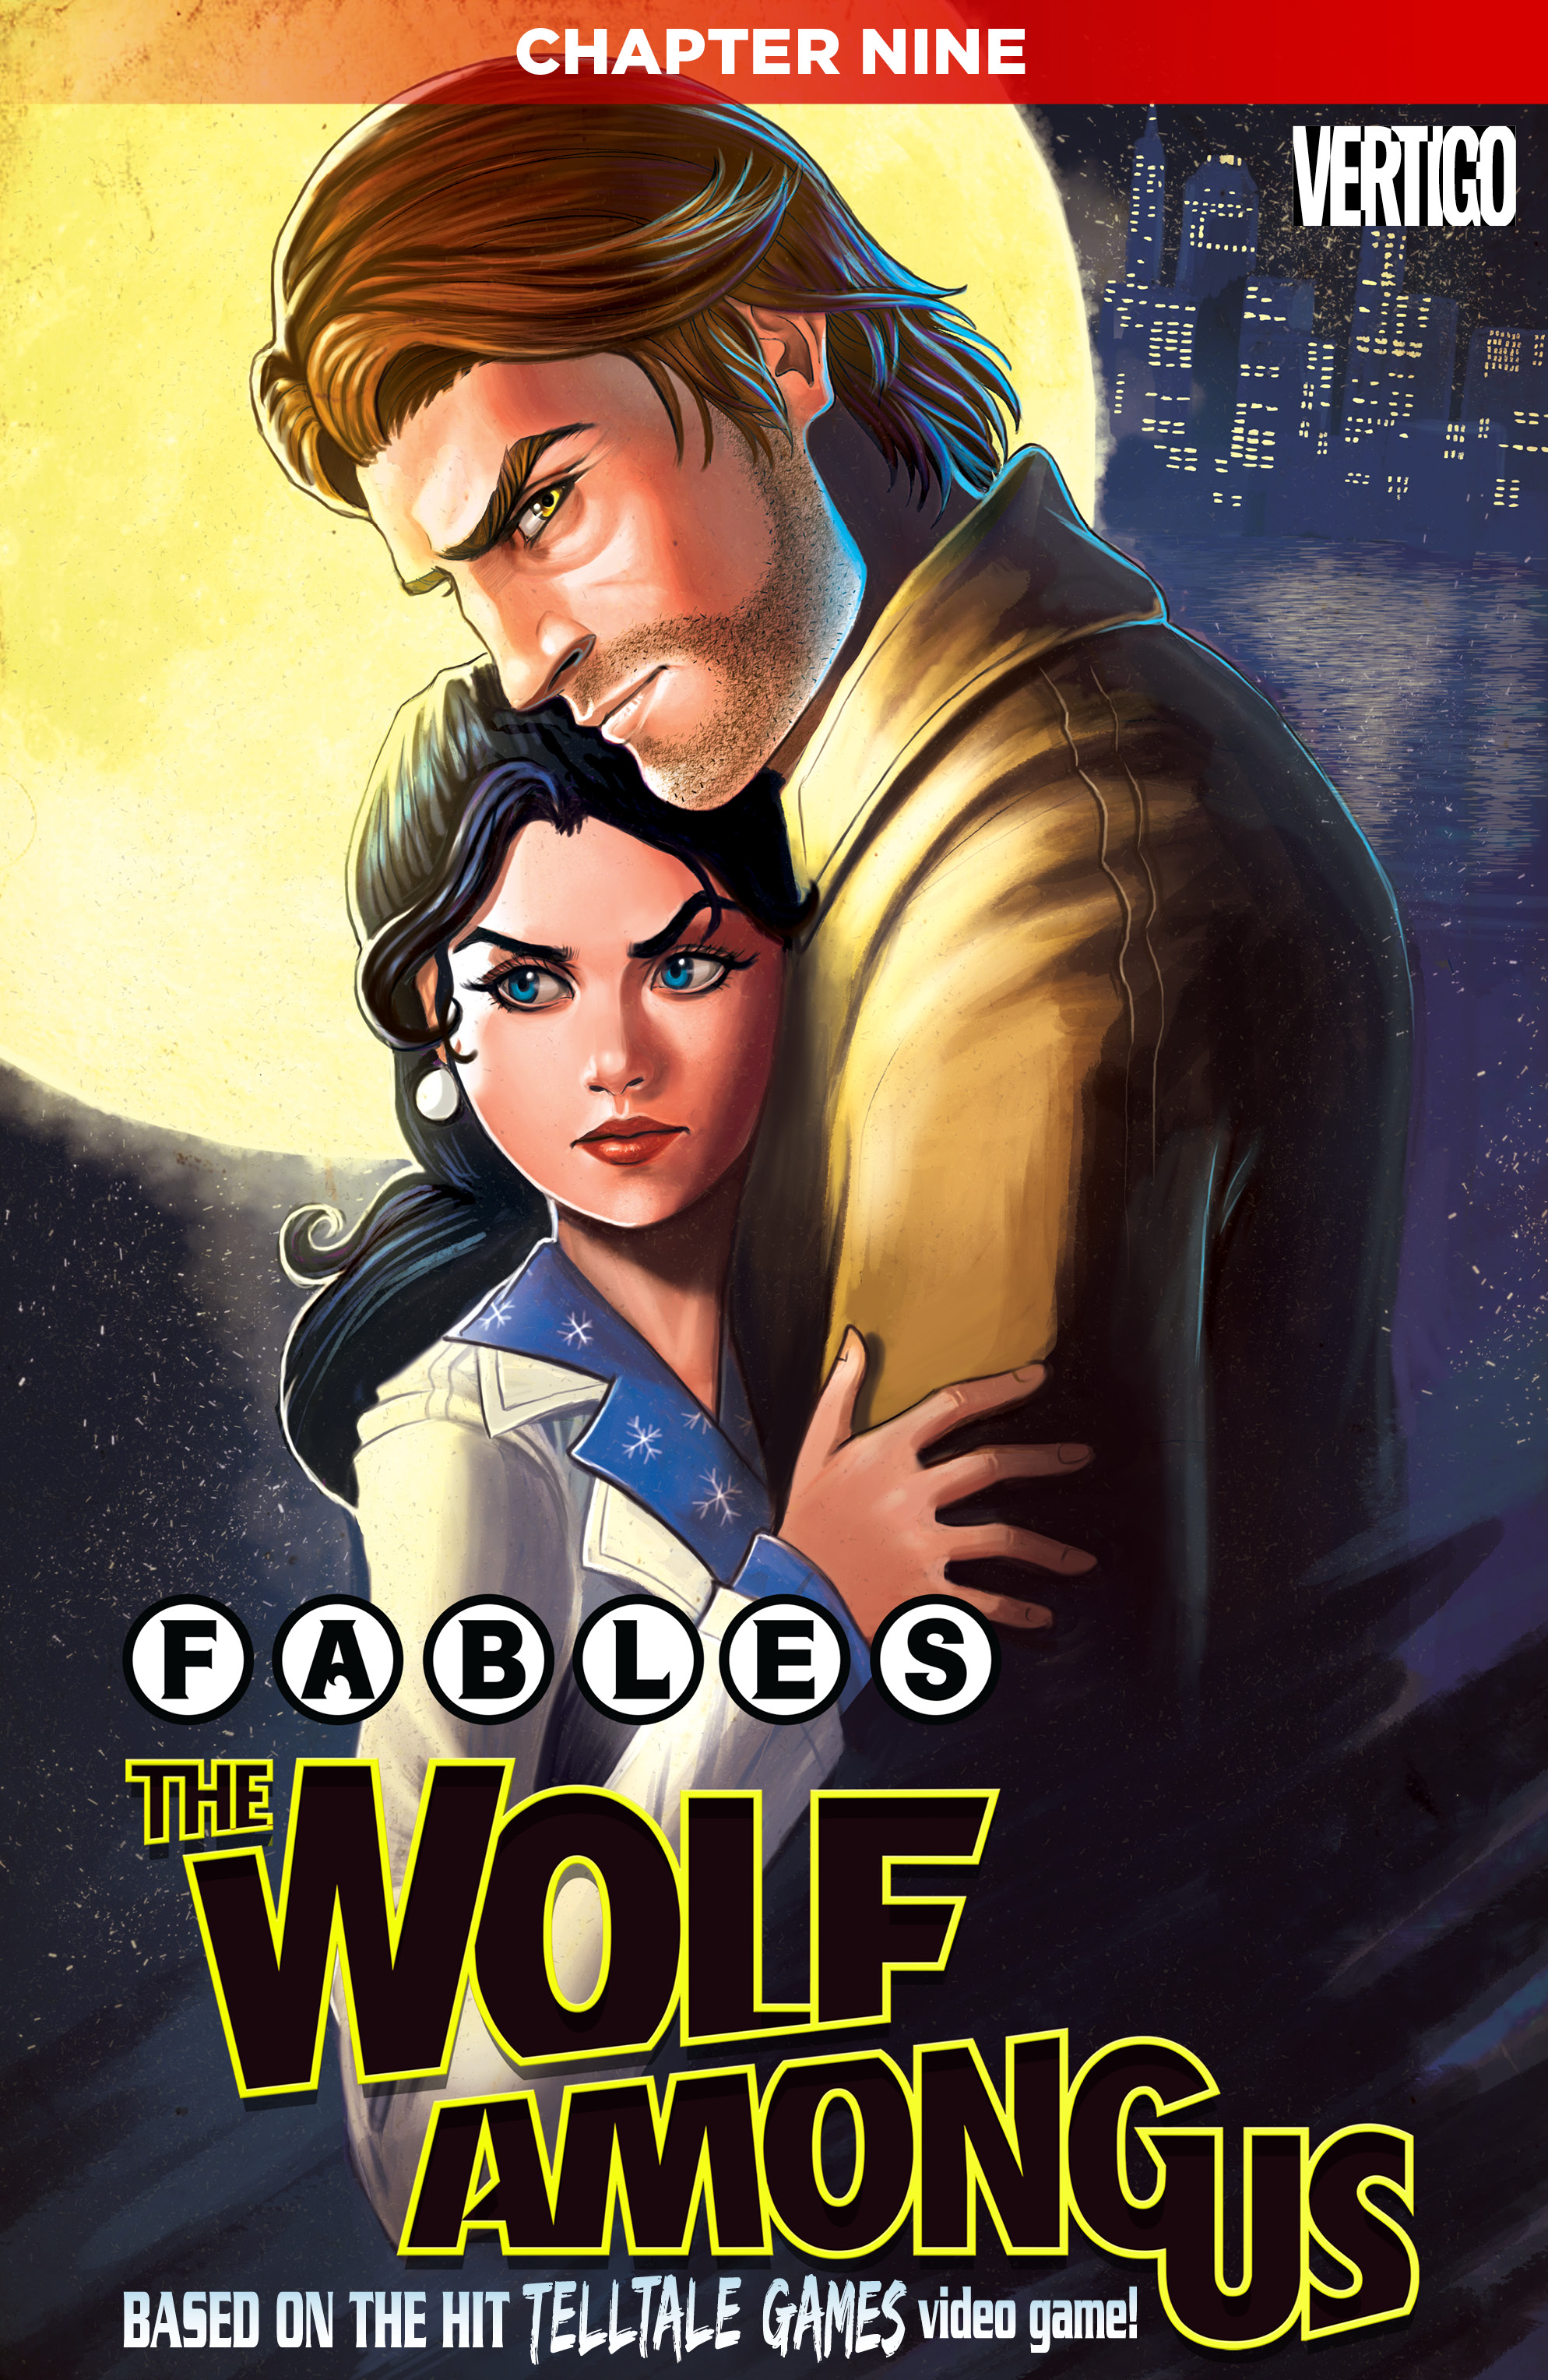 Fables: The Wolf Among Us #9 preview images